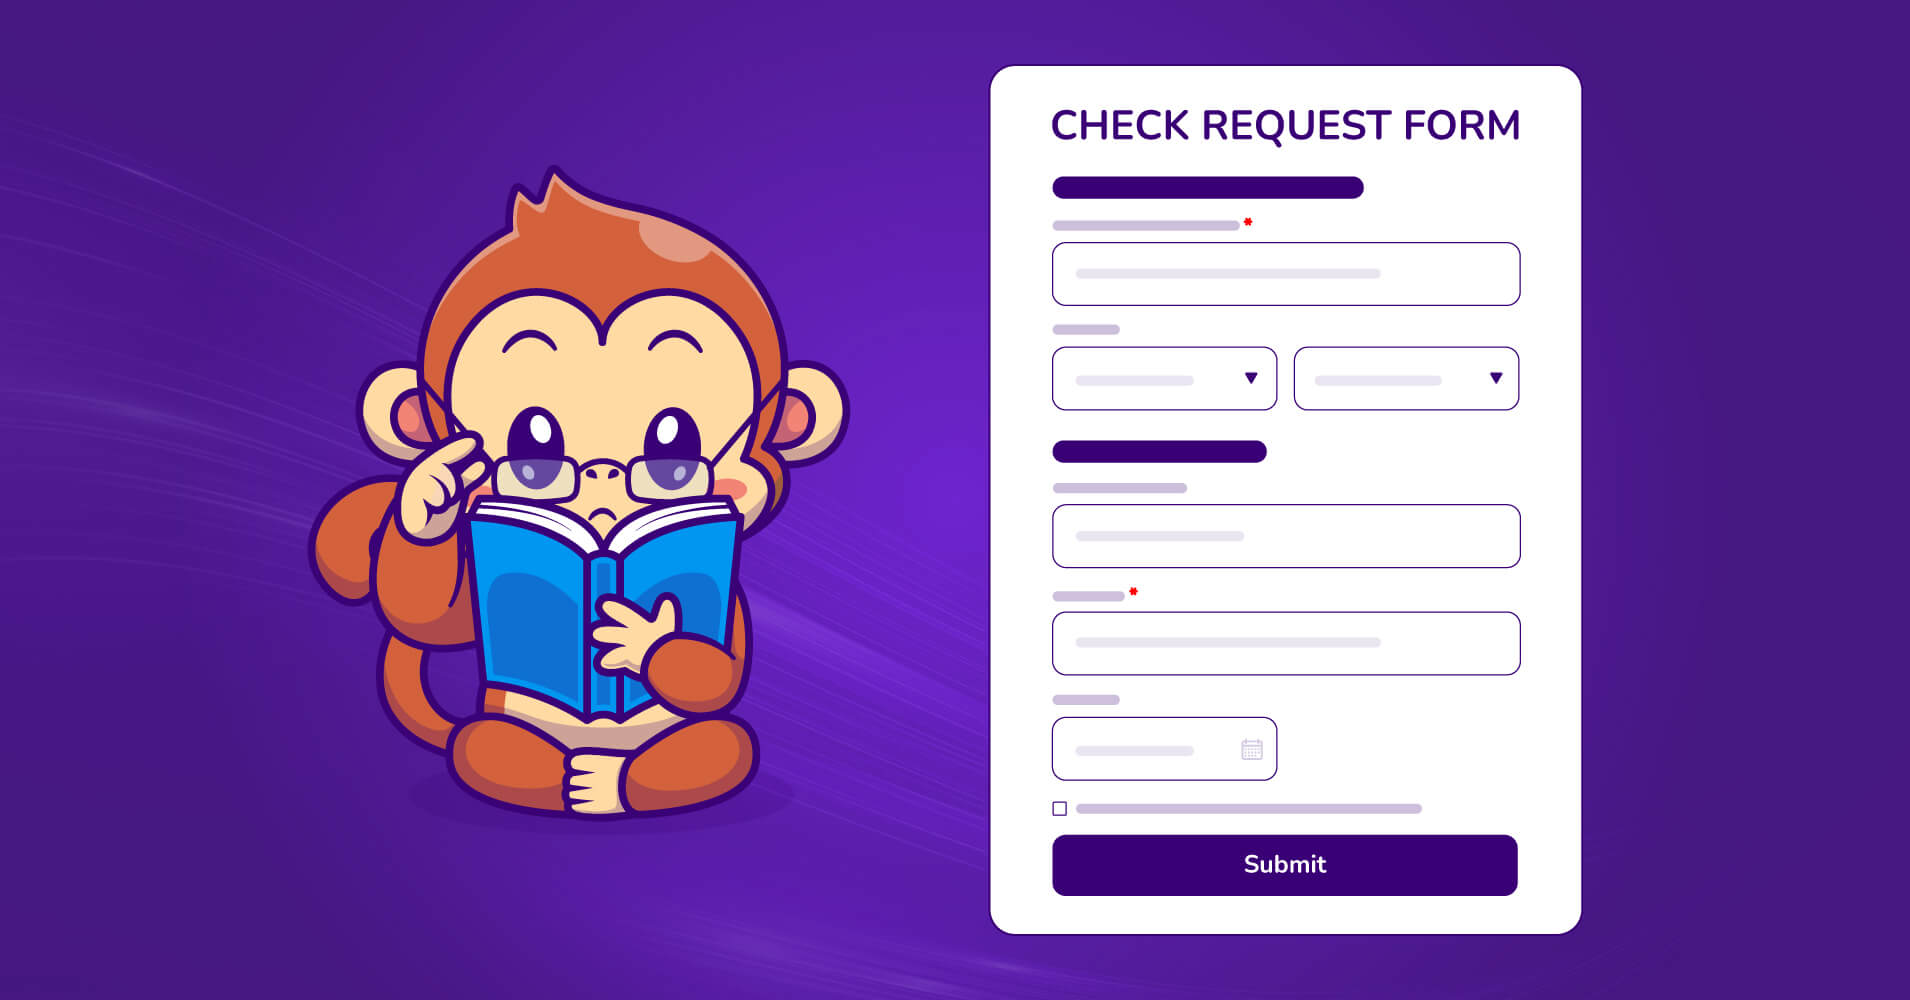 How to create a check request form